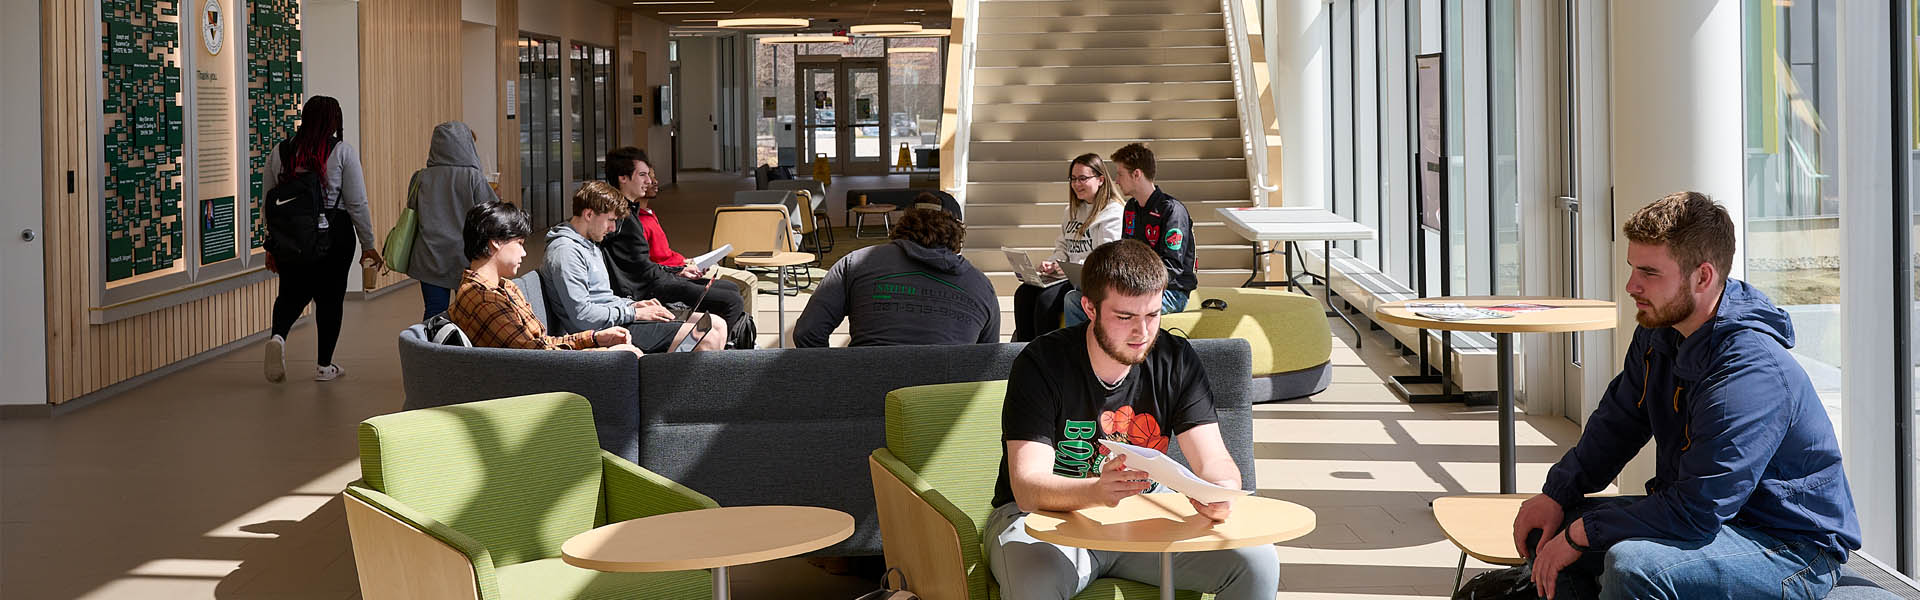 Students studying in Harold Alfond Hall